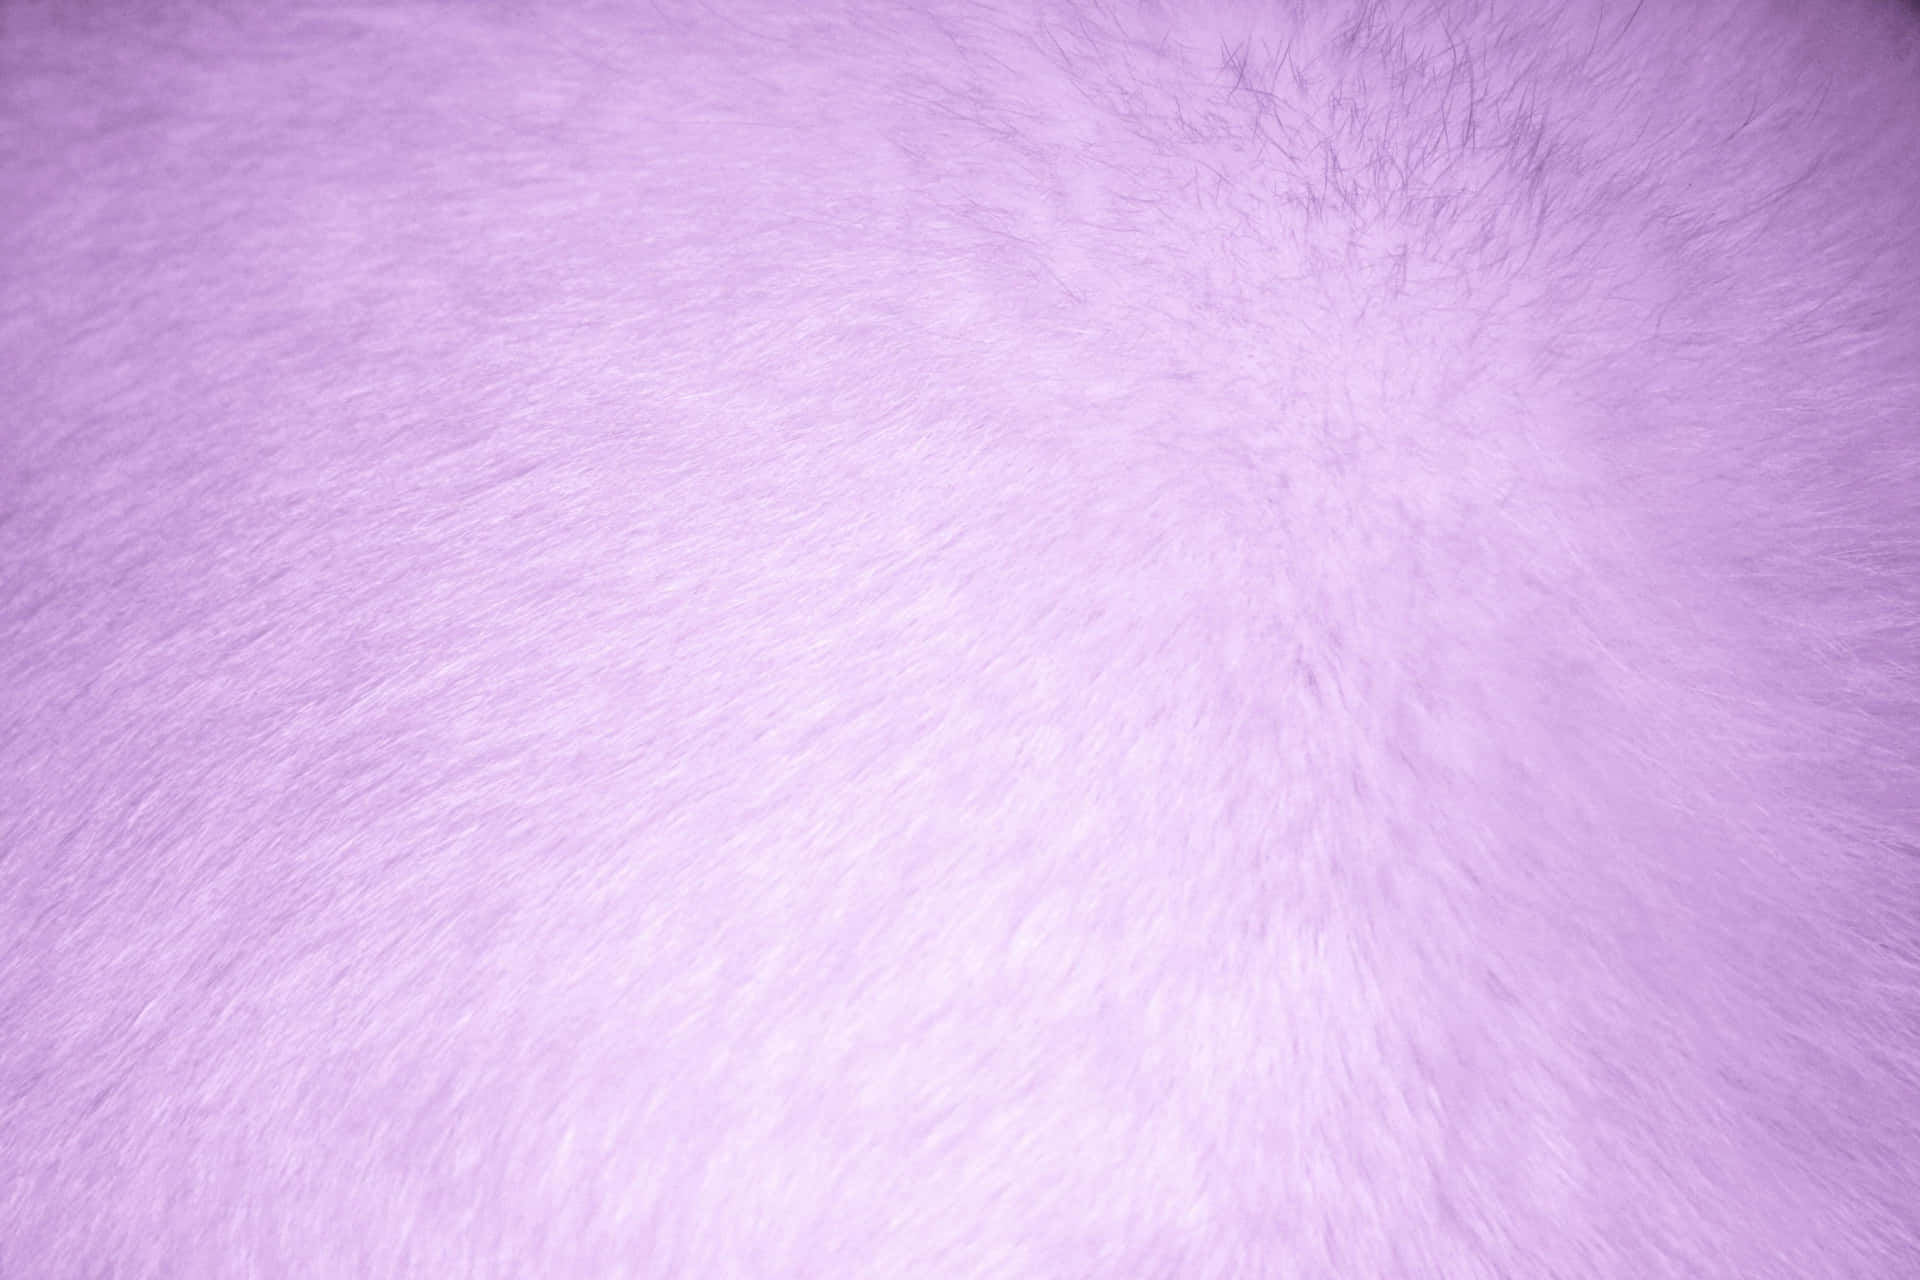 Smooth and stylish, this purple faux fur makes a luxurious addition to any living space. Wallpaper